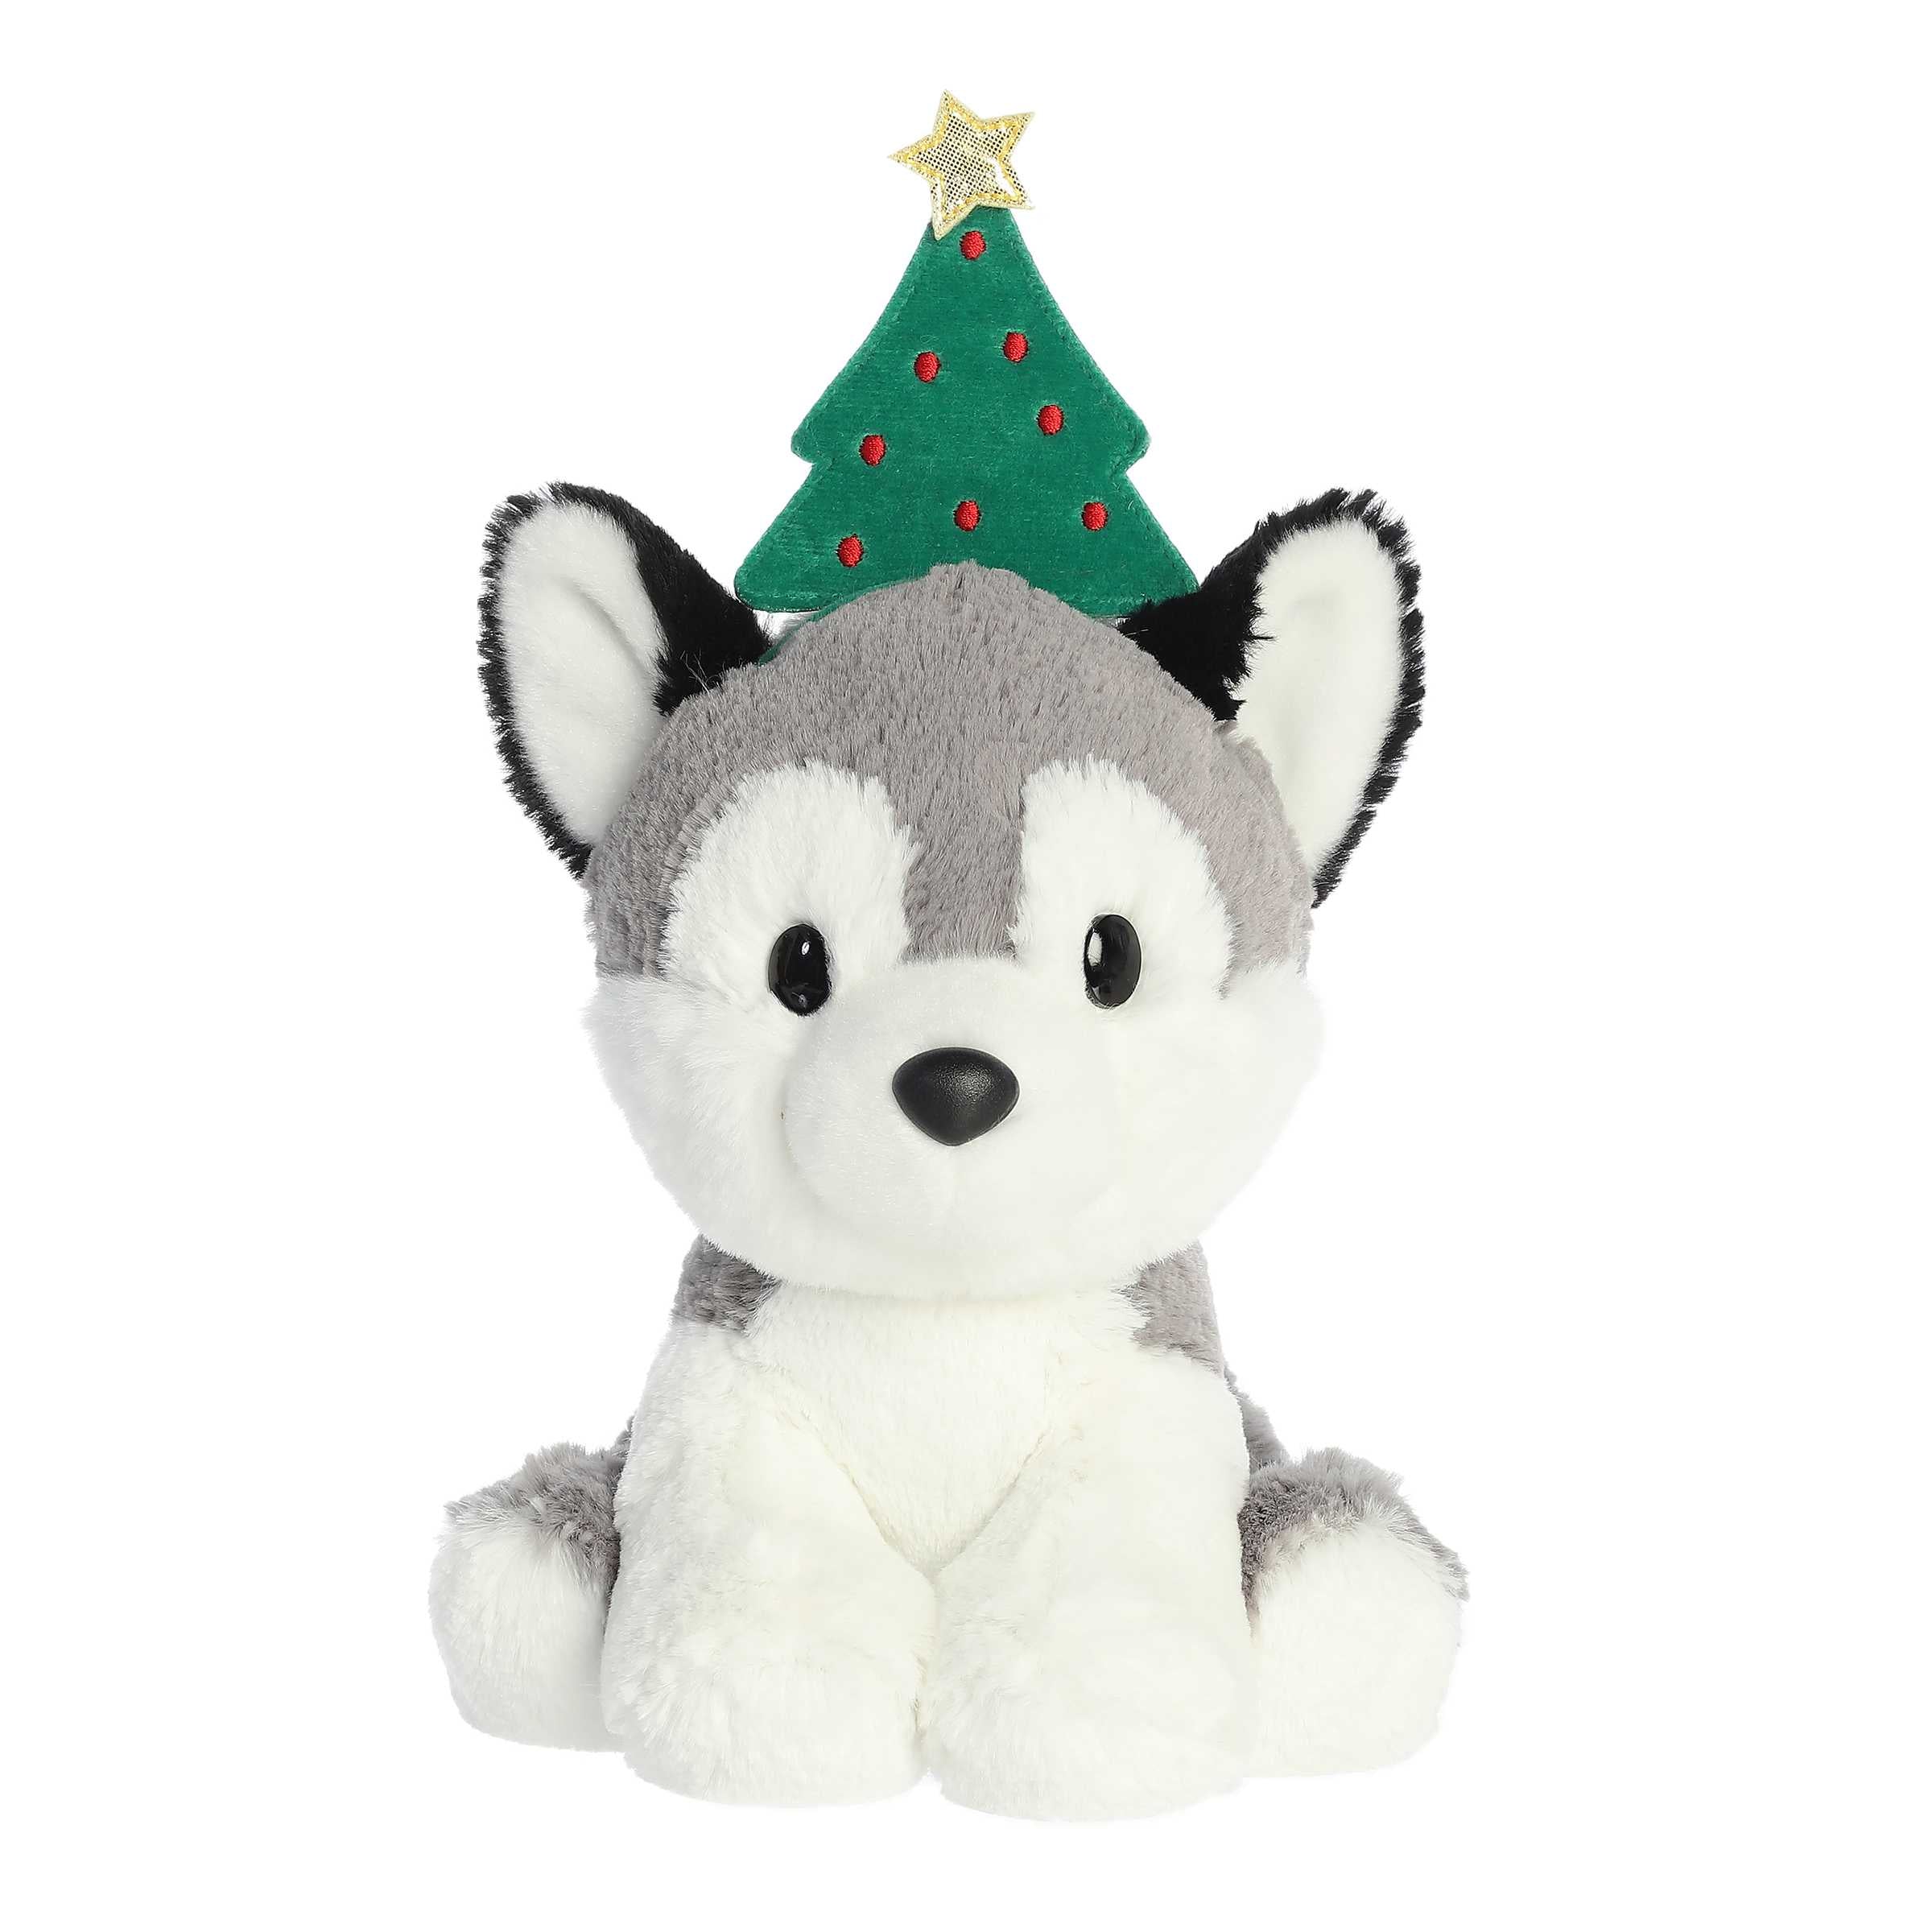 Adorable grey husky with black ears in a sitting position wearing a Christmas tree headband with a star on top